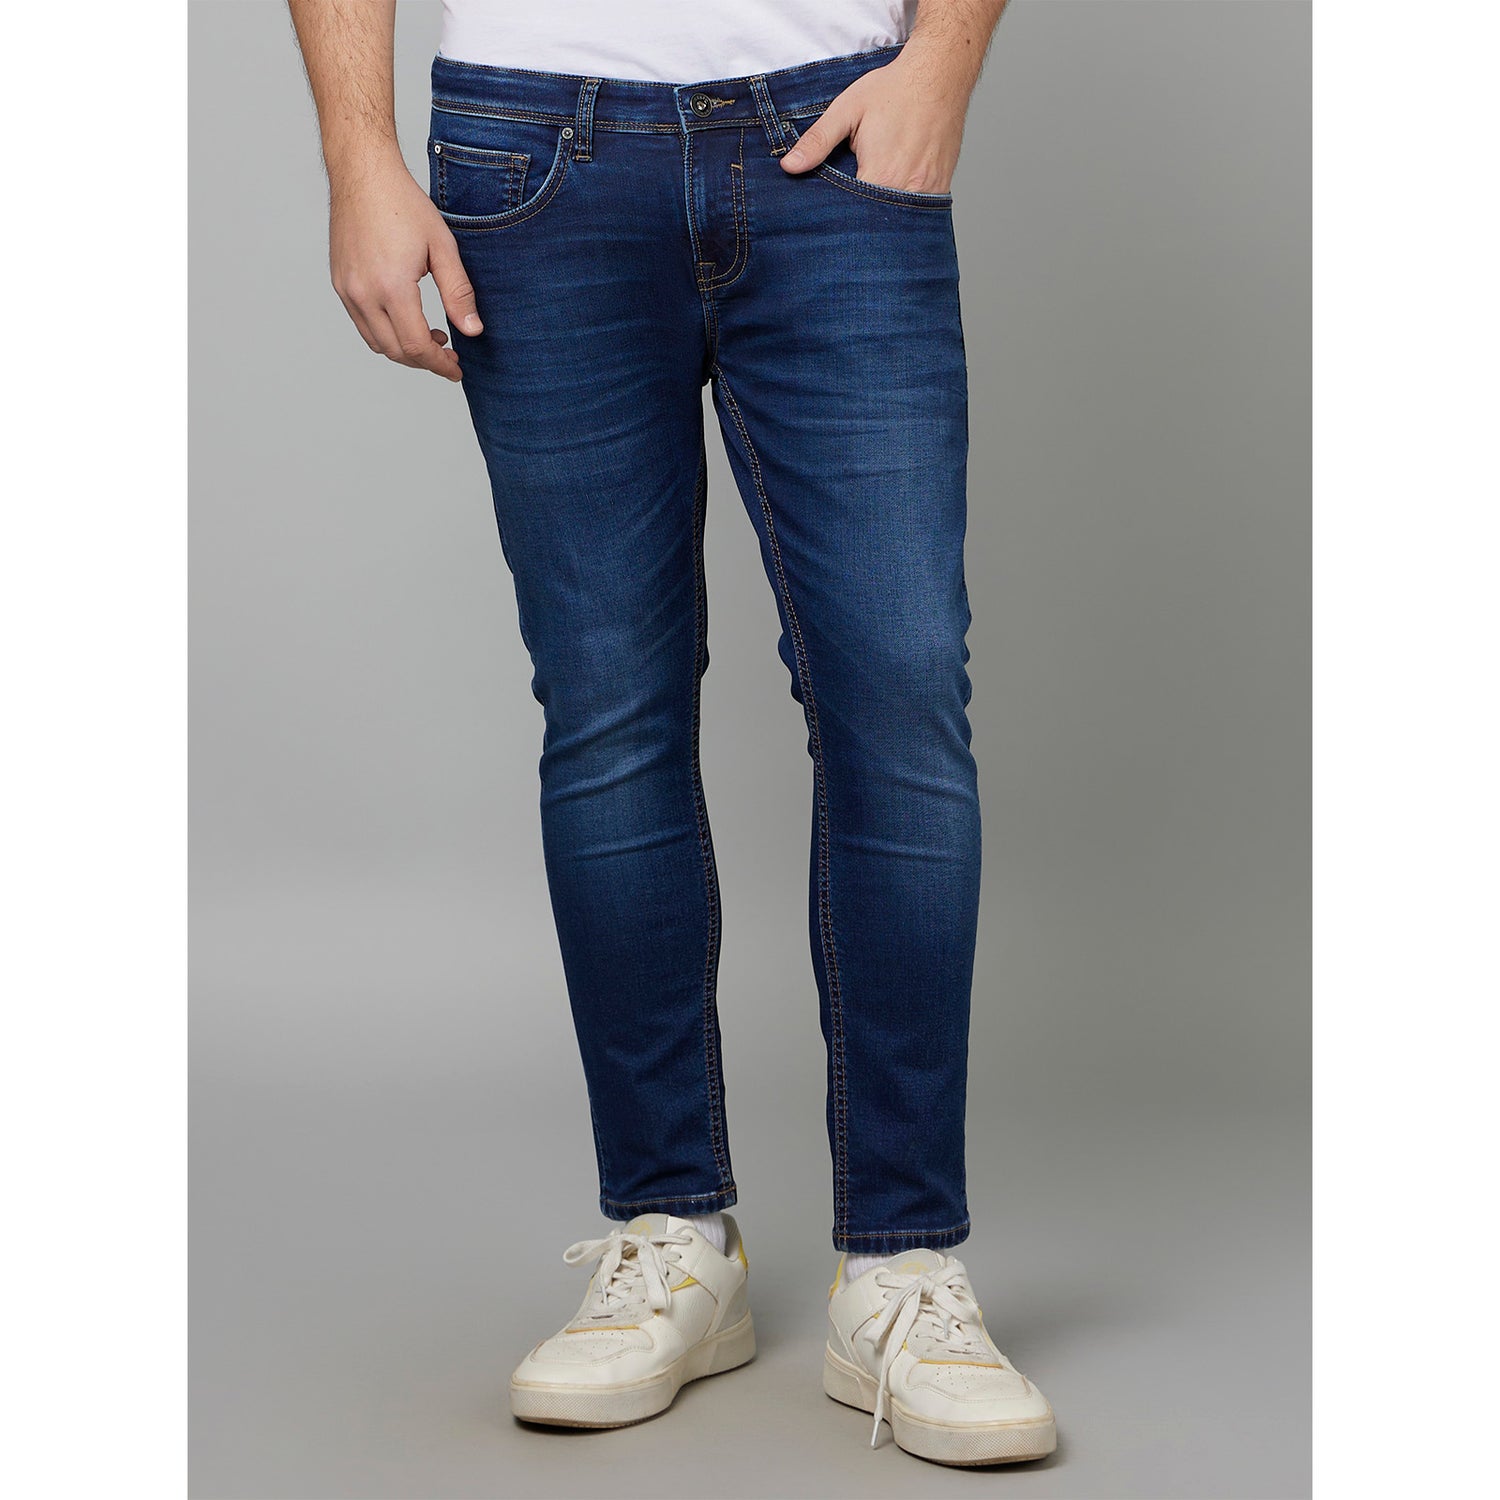 Blue Skinny Fit Light Fade Stretchable Cotton Jeans (FOANKLE3)